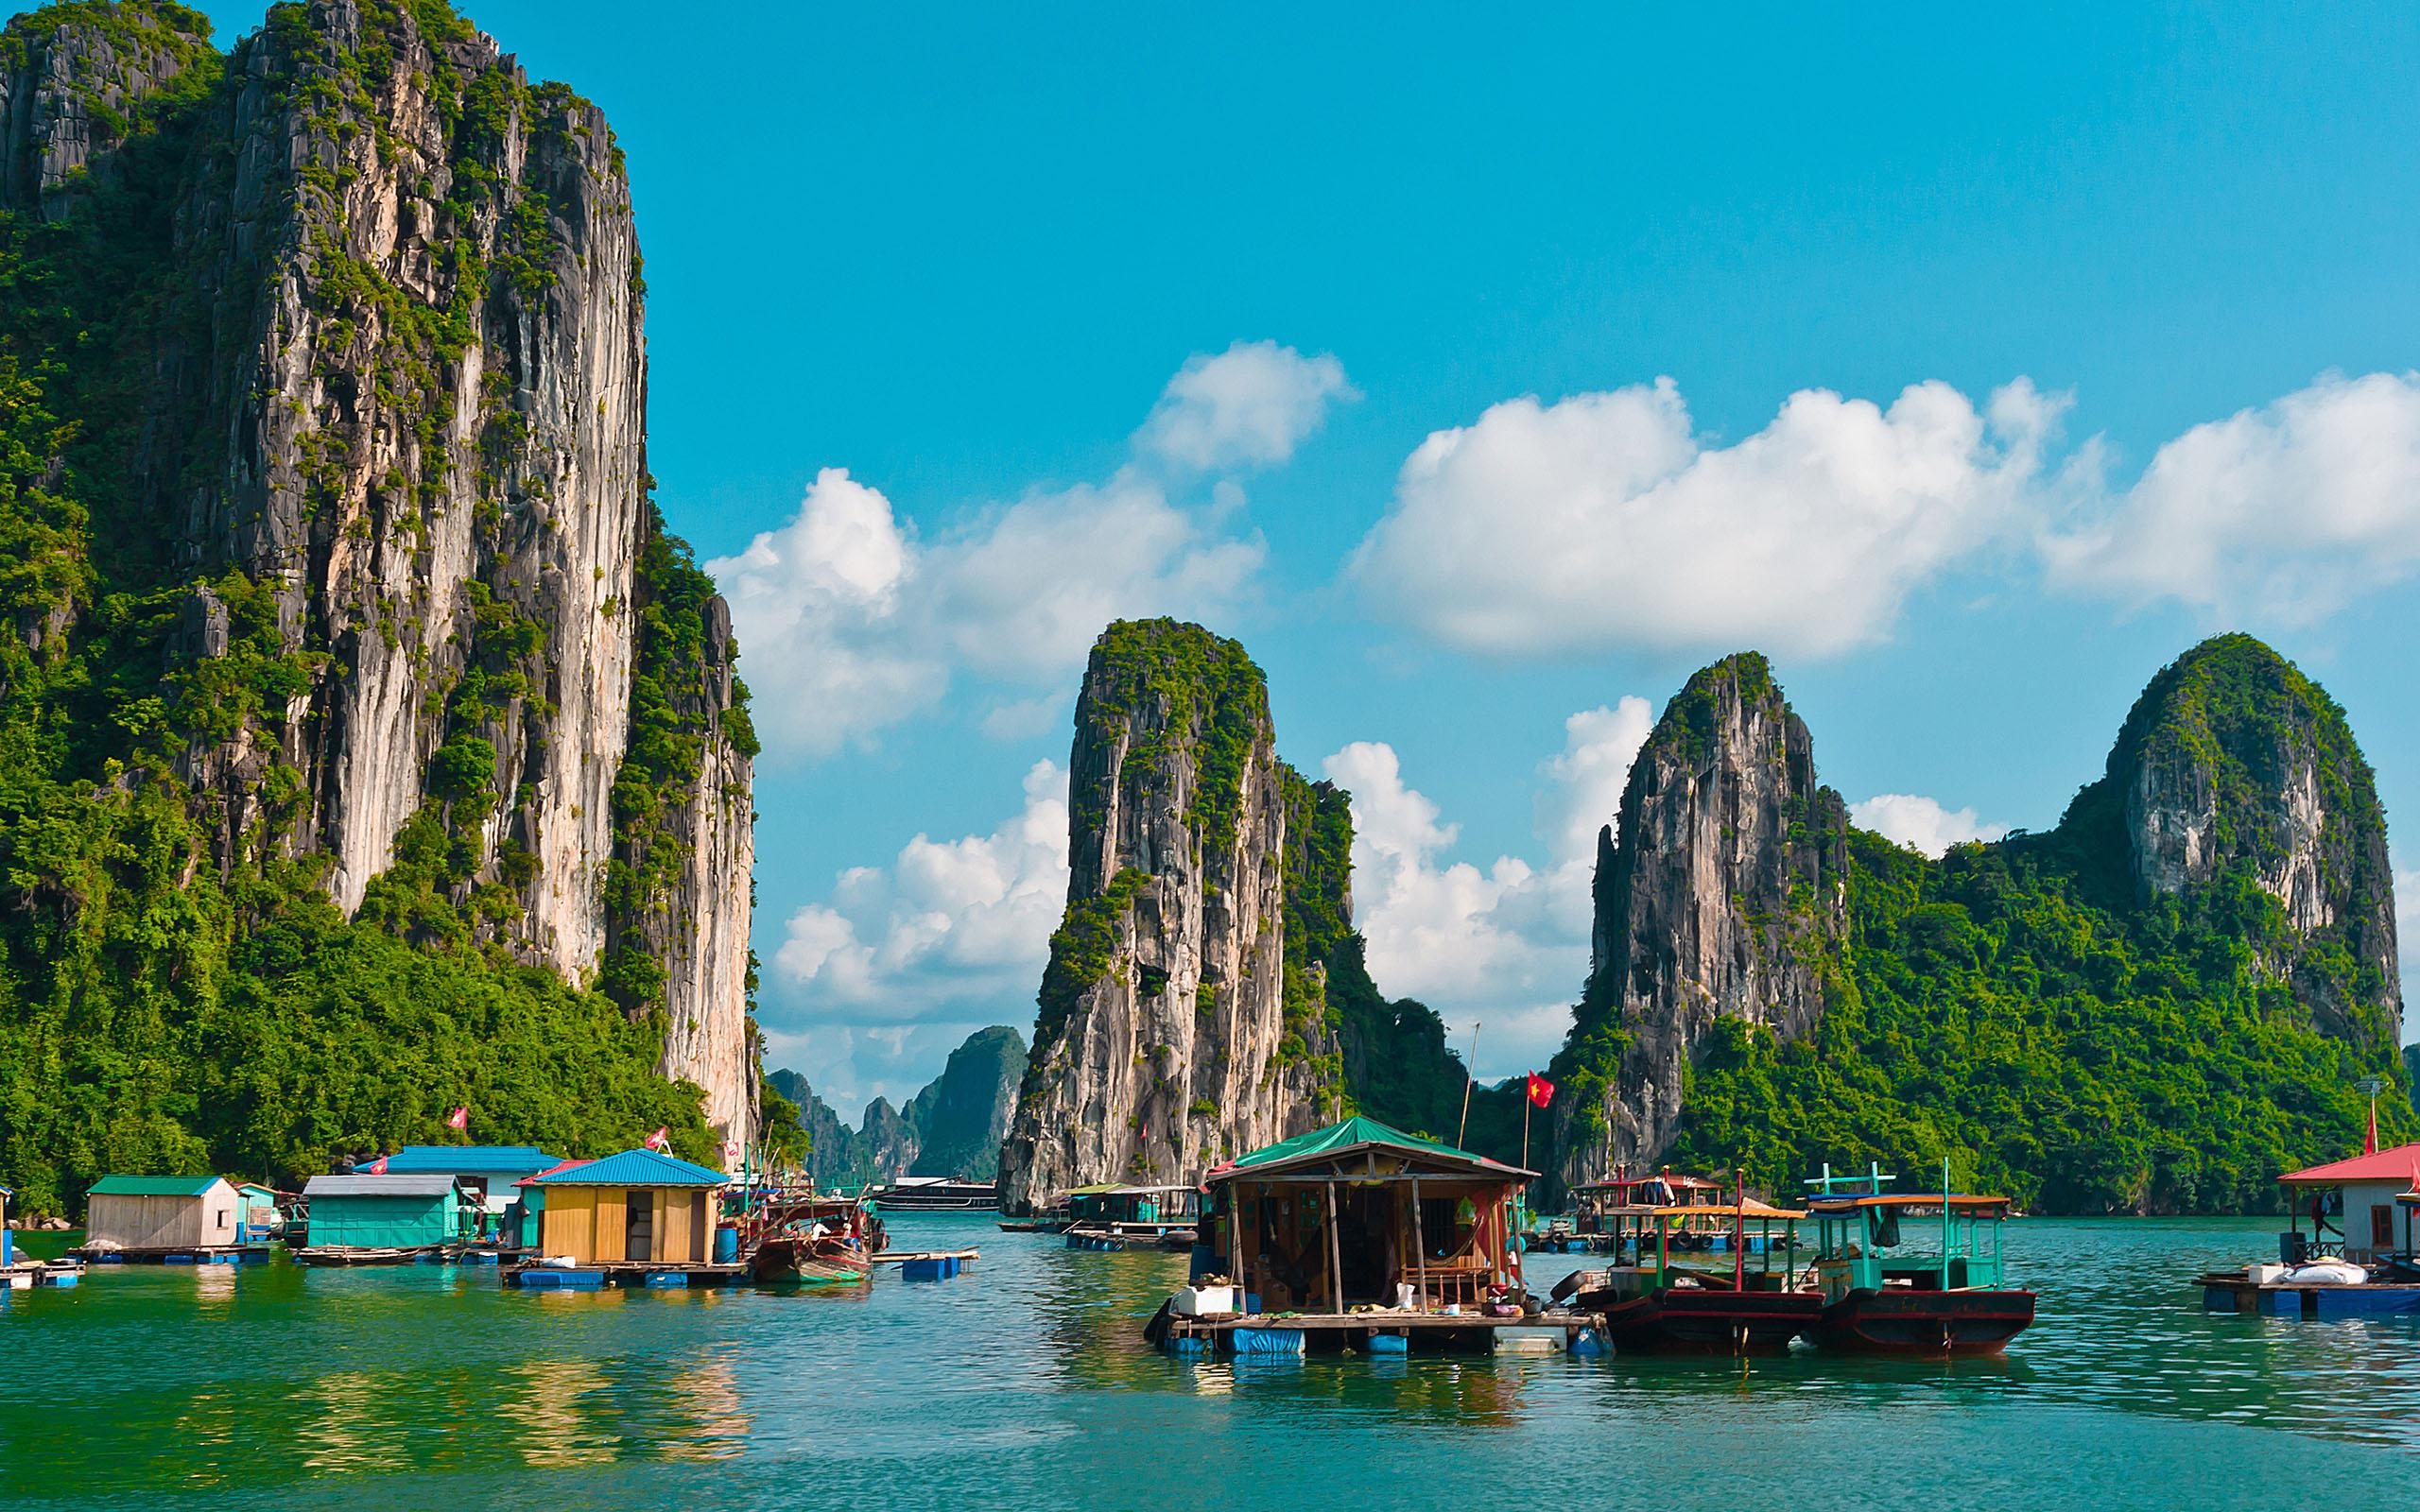 Can You Name These Popular Holiday Destinations? Quiz Ha Long Bay, Vietnam